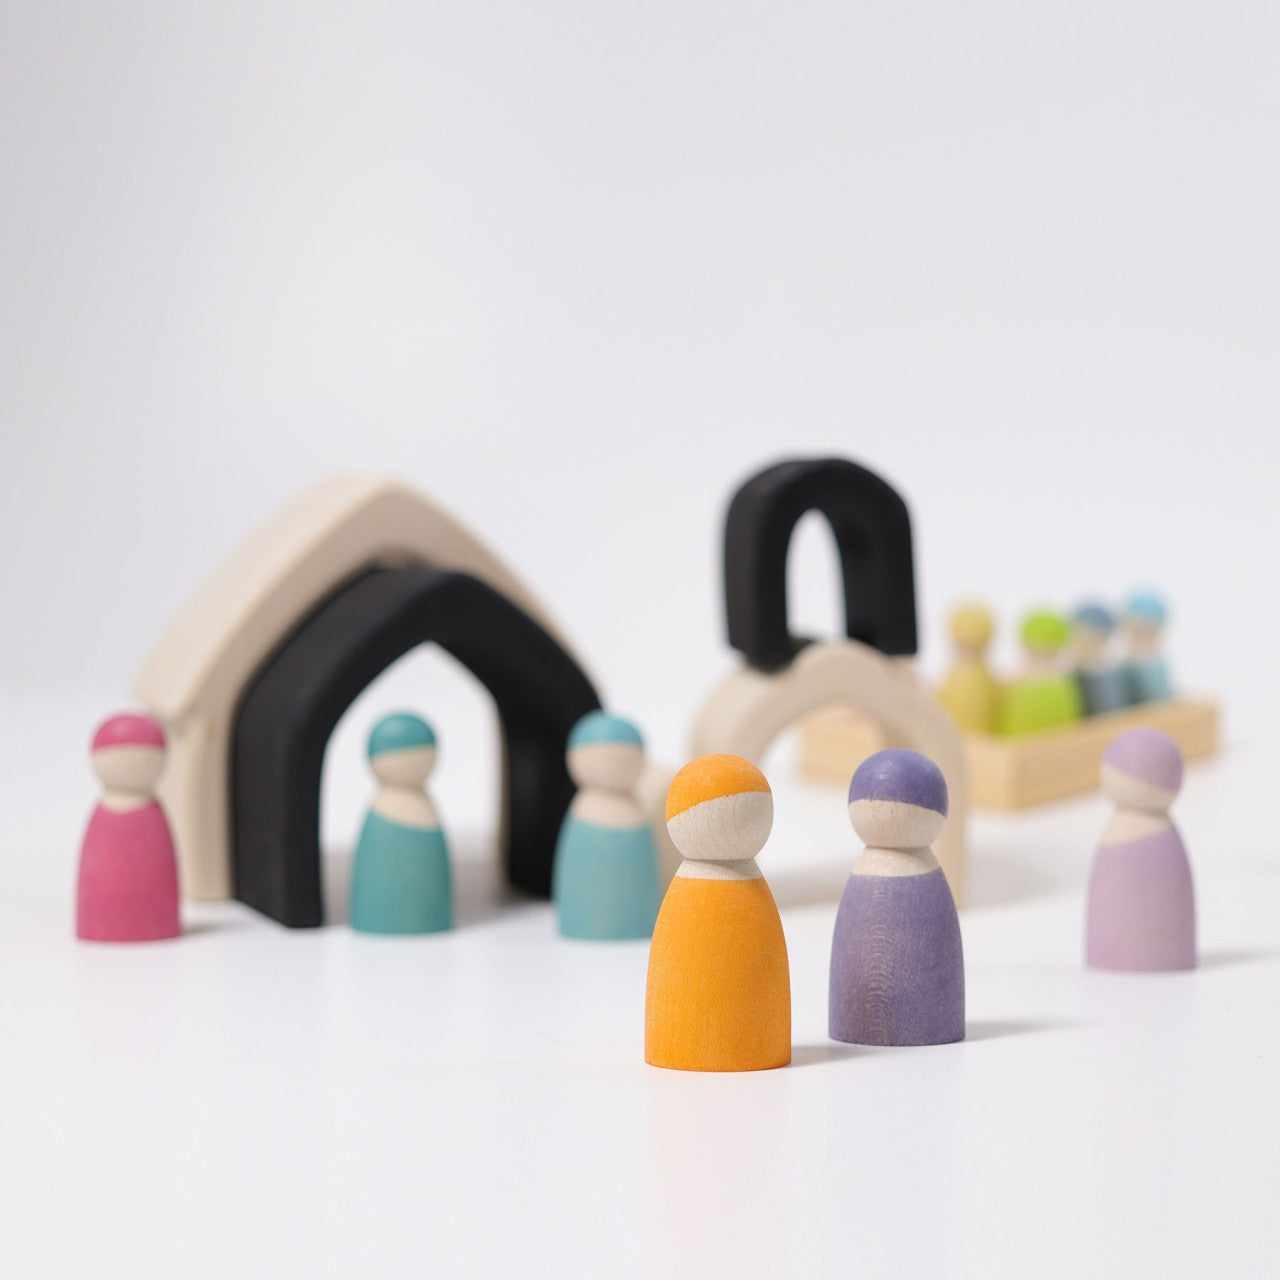 Monochrome House | 5 Pieces | Wooden Toys for Kids | Open-Ended Play